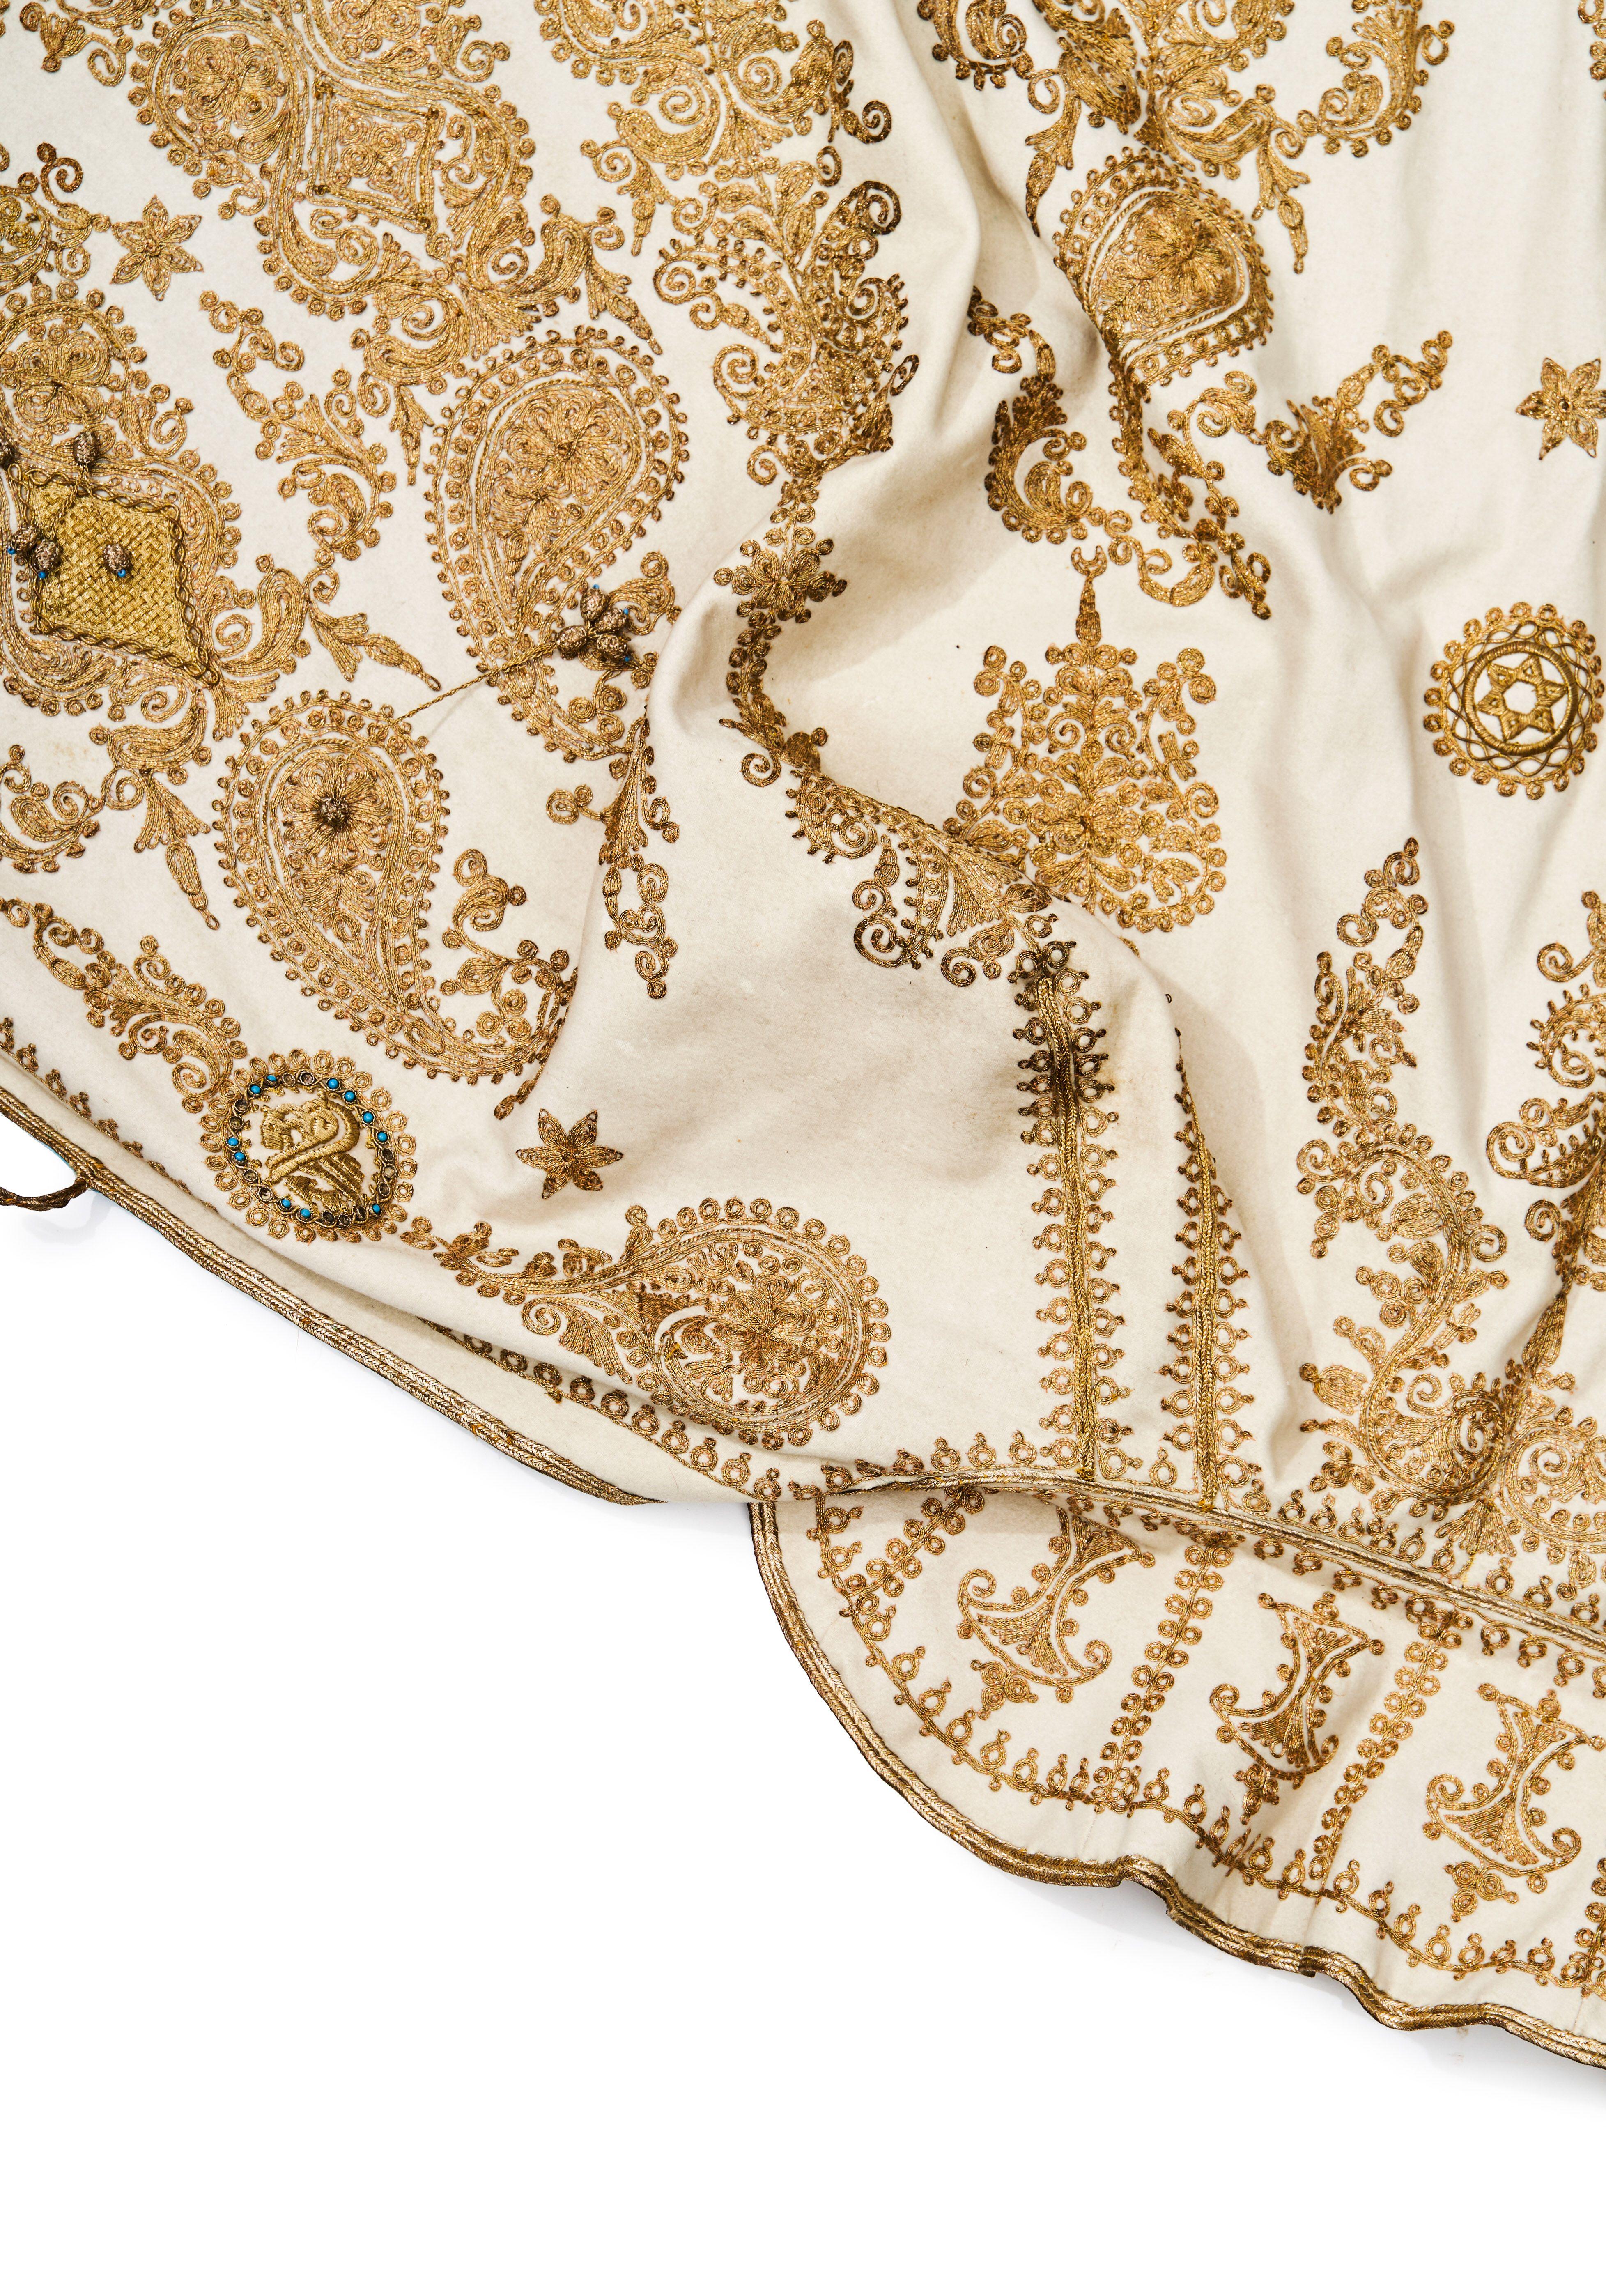 SILK, WOOL AND SILVER GILT MOROCCAN EMBROIDERY CEREMONIAL CAPE - Image 5 of 5